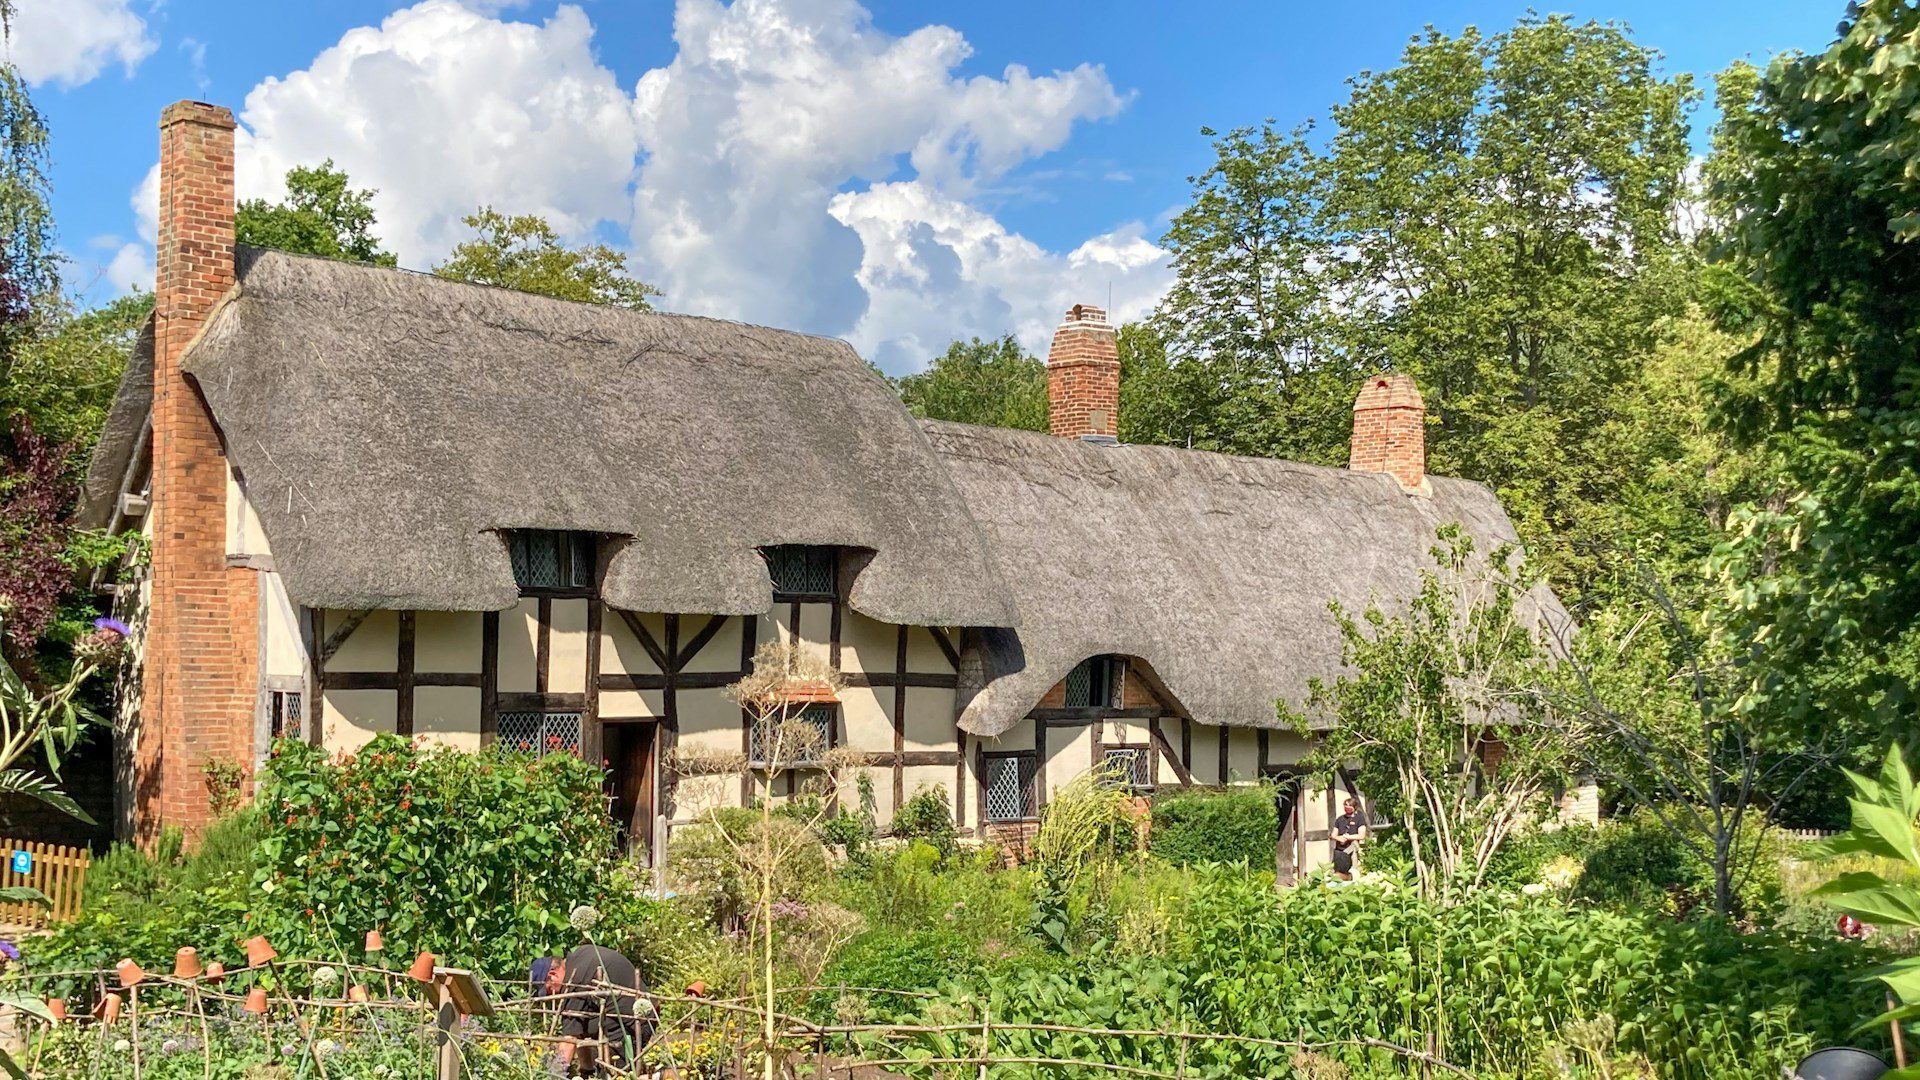 Photo of a large thatched cottage, with three brick chimney stacks, surrounded by leafy trees and gardens